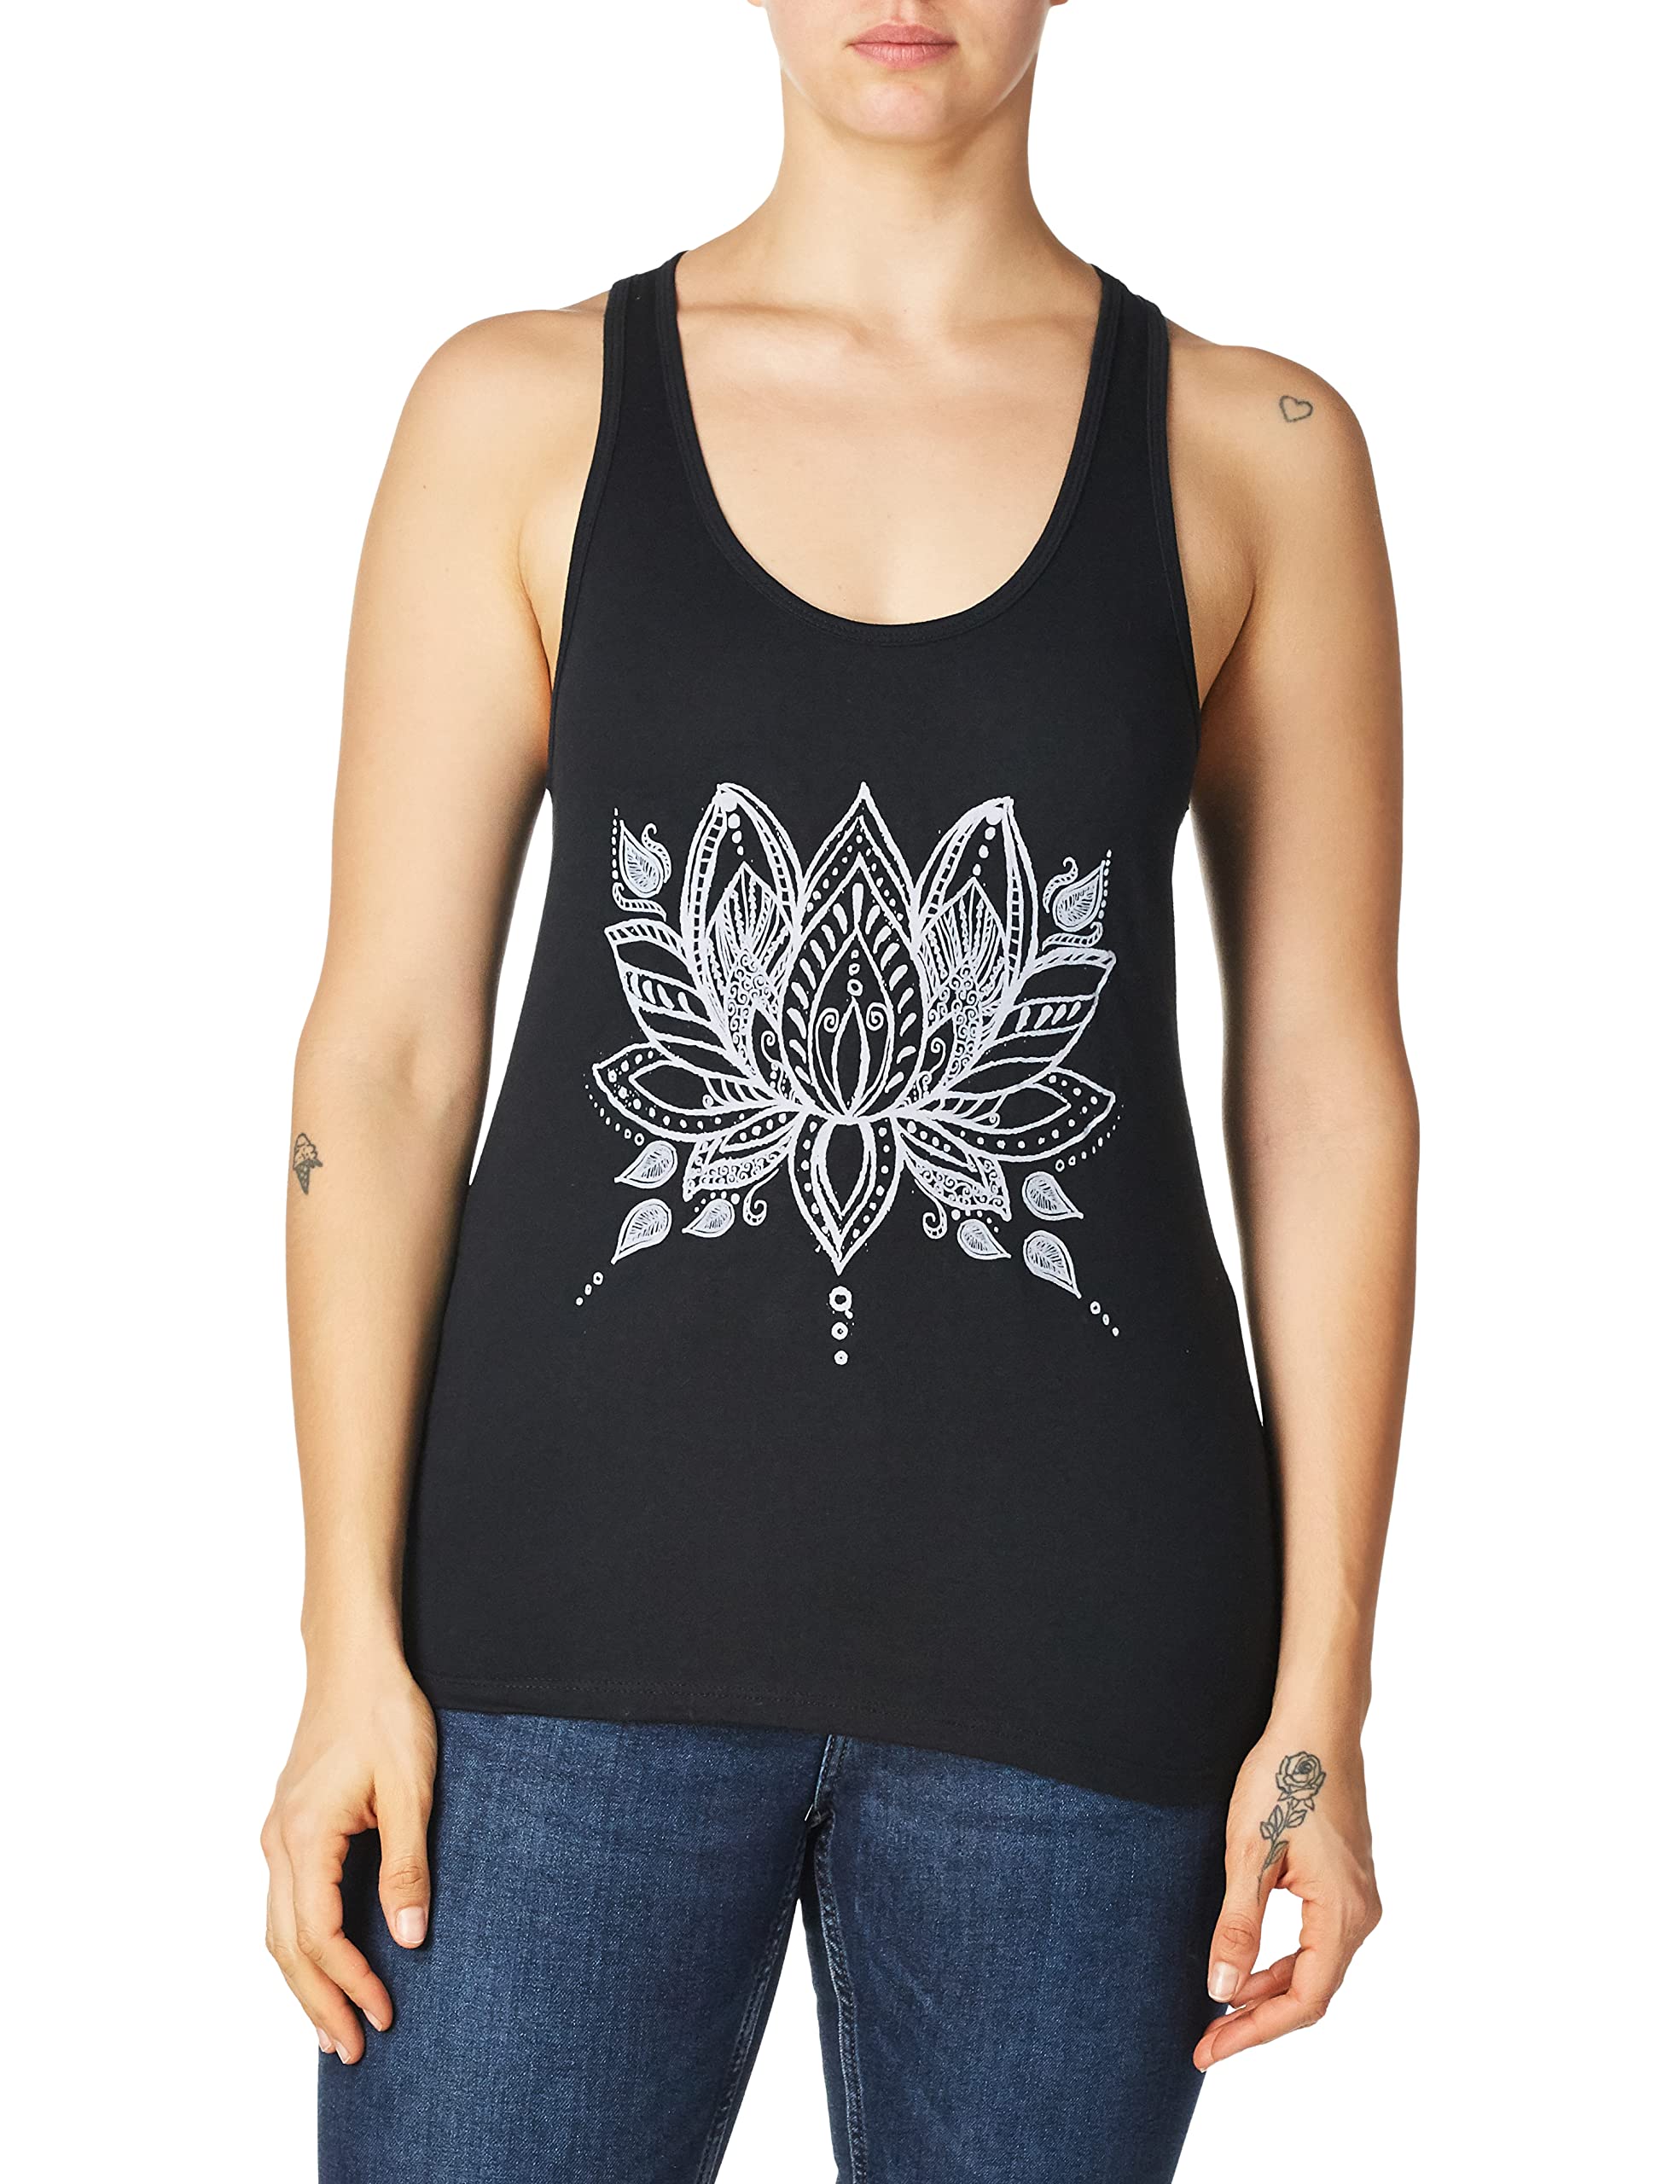 Chin-Up womens Henna Lotus Flower Ideal Racerback Graphic Tank Top T Shirt, Black, X-Large US